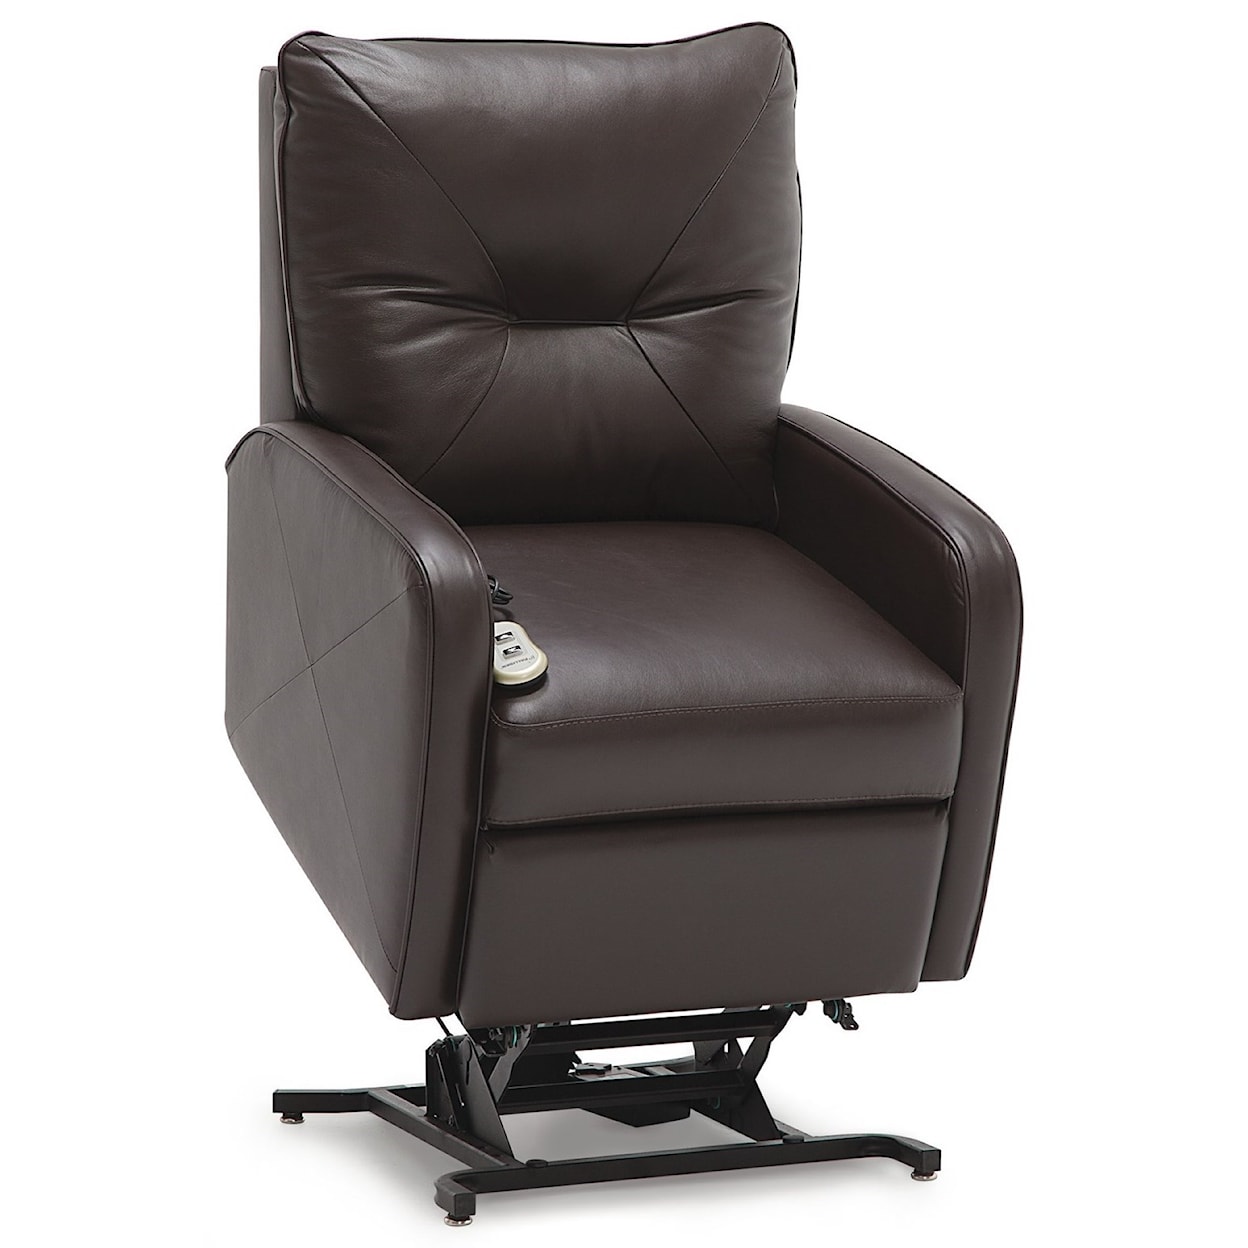 Palliser Theo 42002 Lift Chair with Power